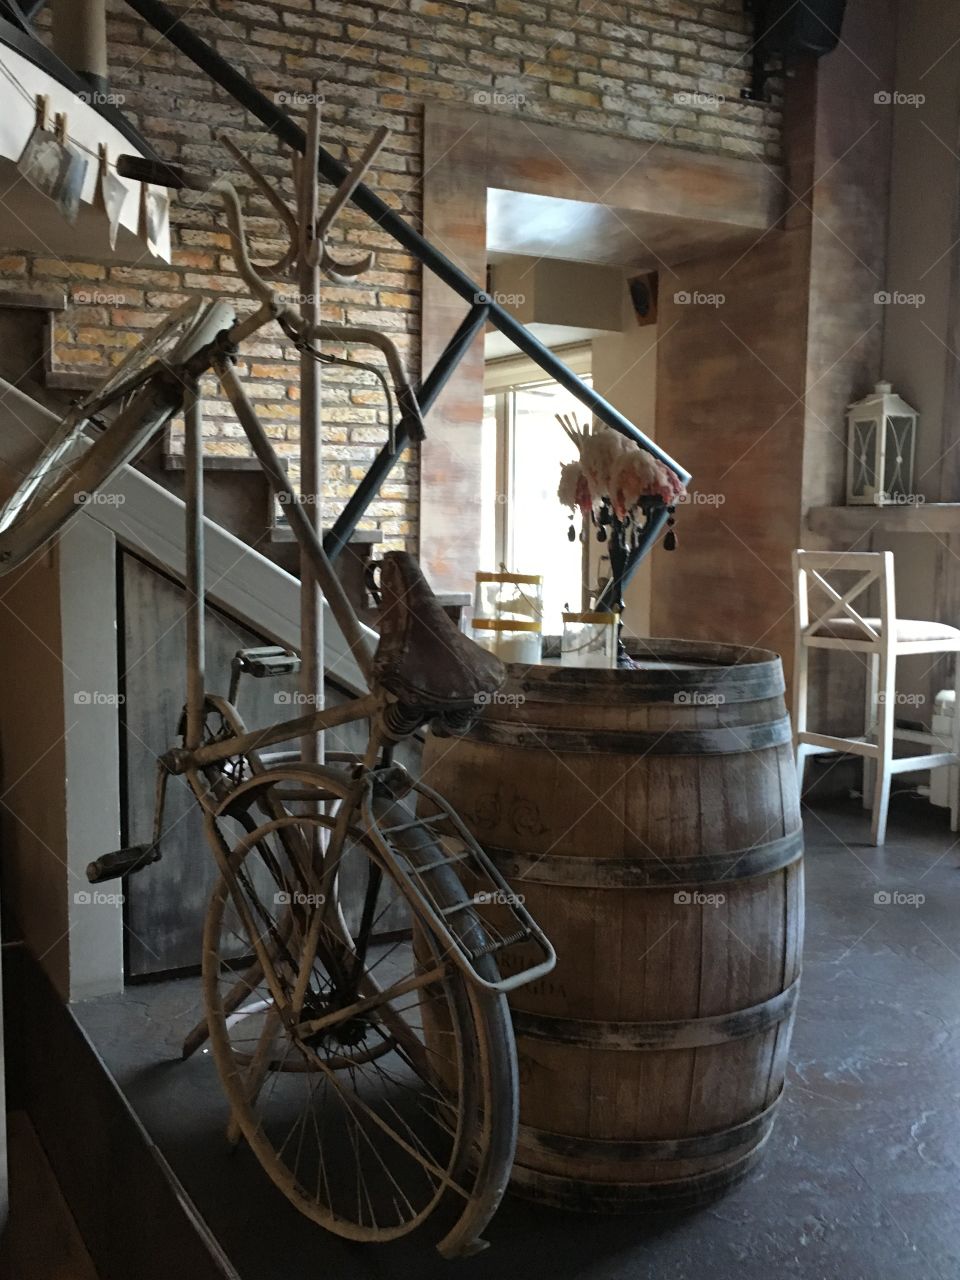 A barrel and a wheel at the restaurant entrance